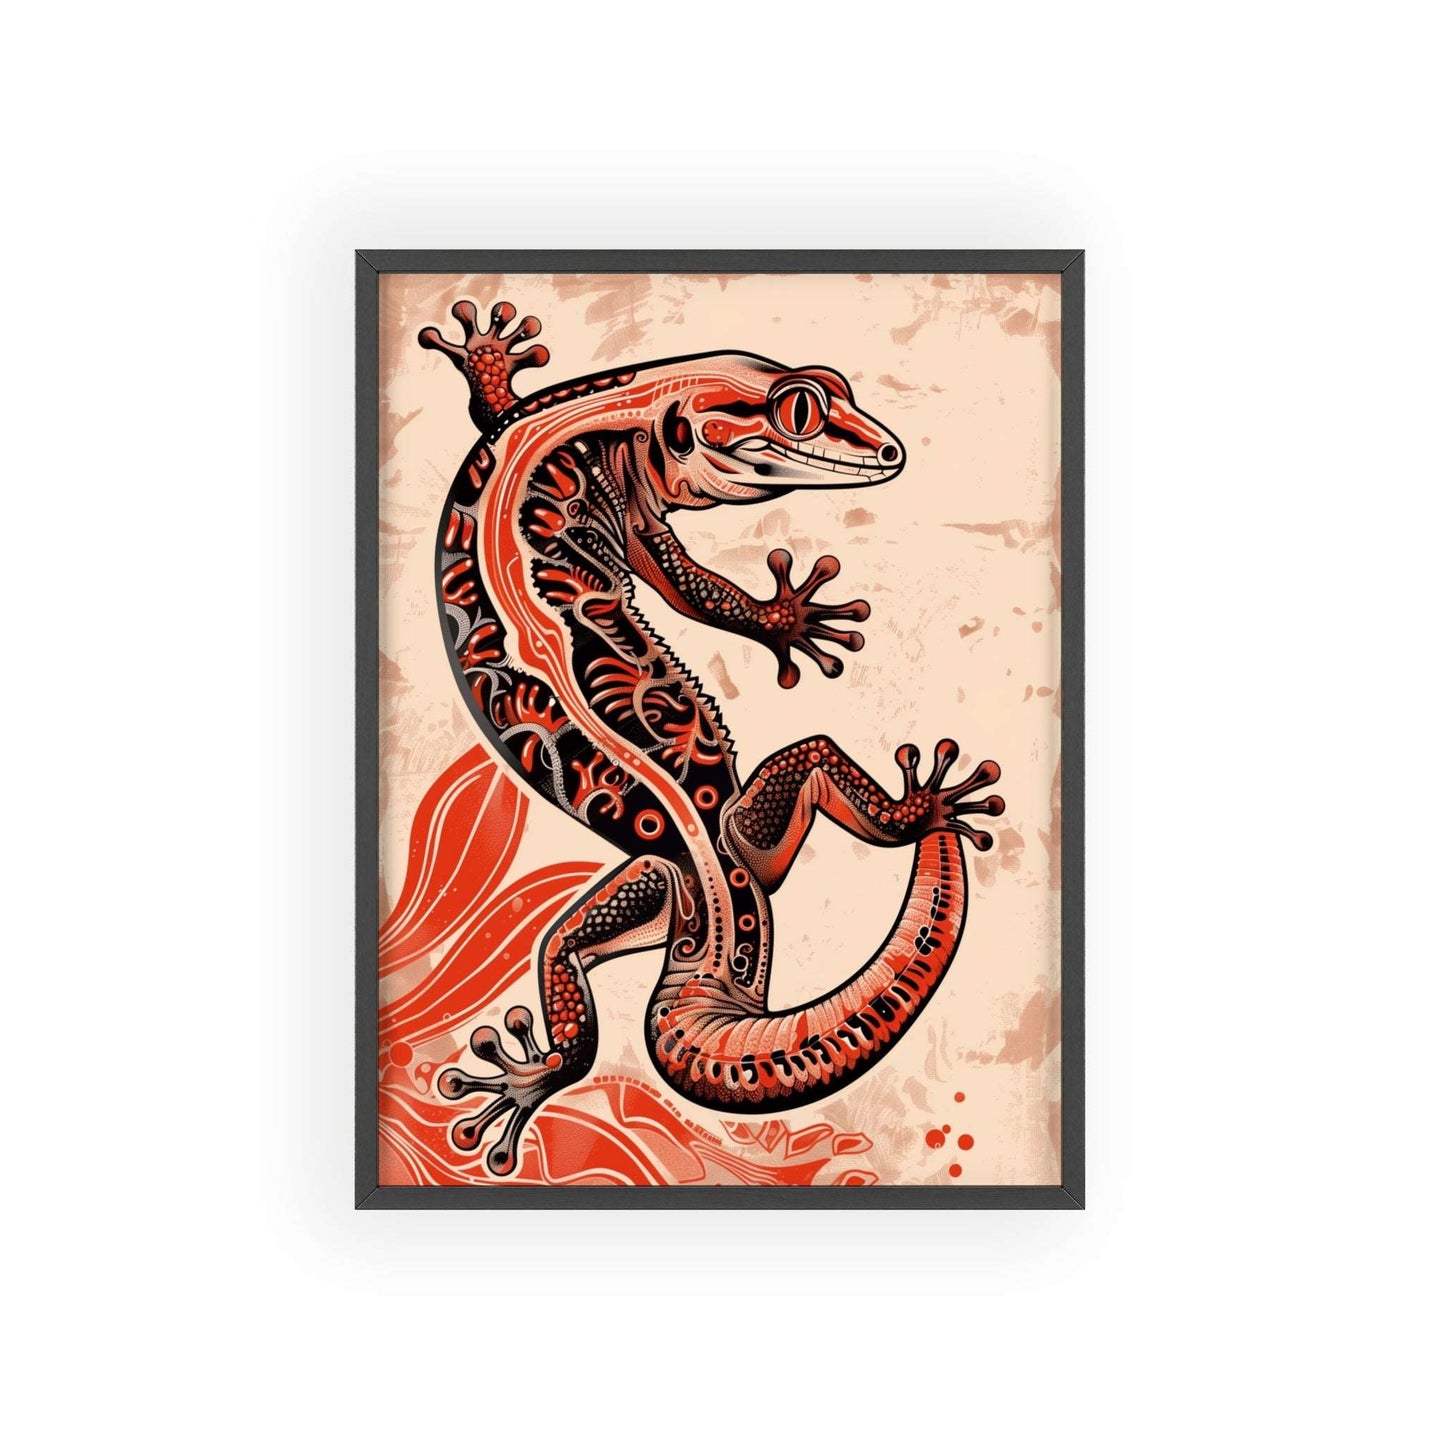 This original vector framed poster adds a touch of magic and intrigue to your home decor